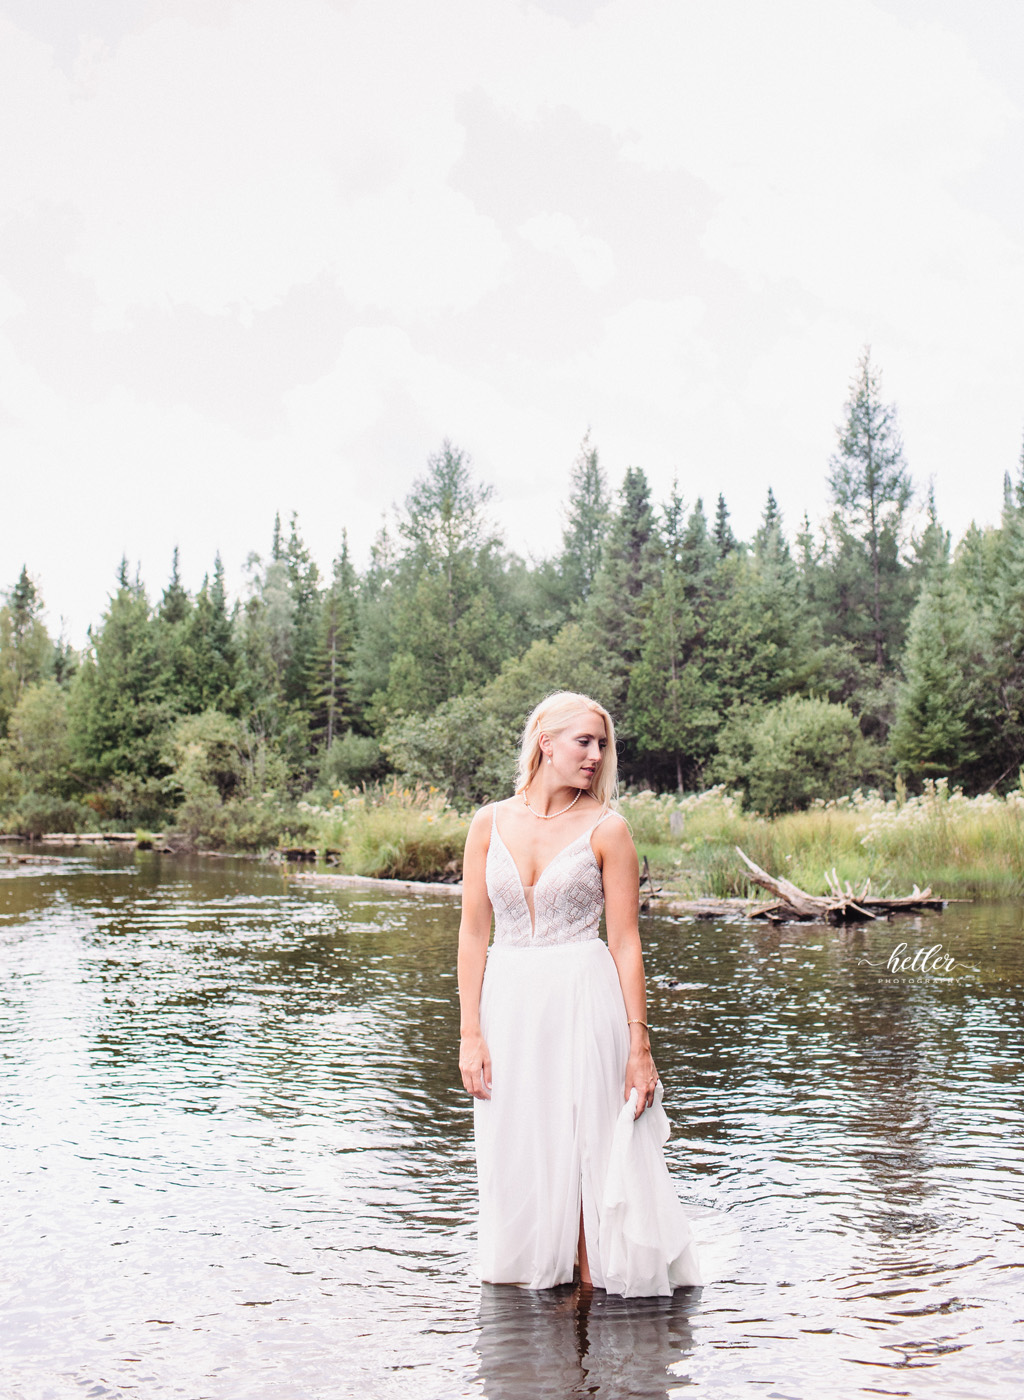 Summer wedding in Grayling Michigan on the AuSable River